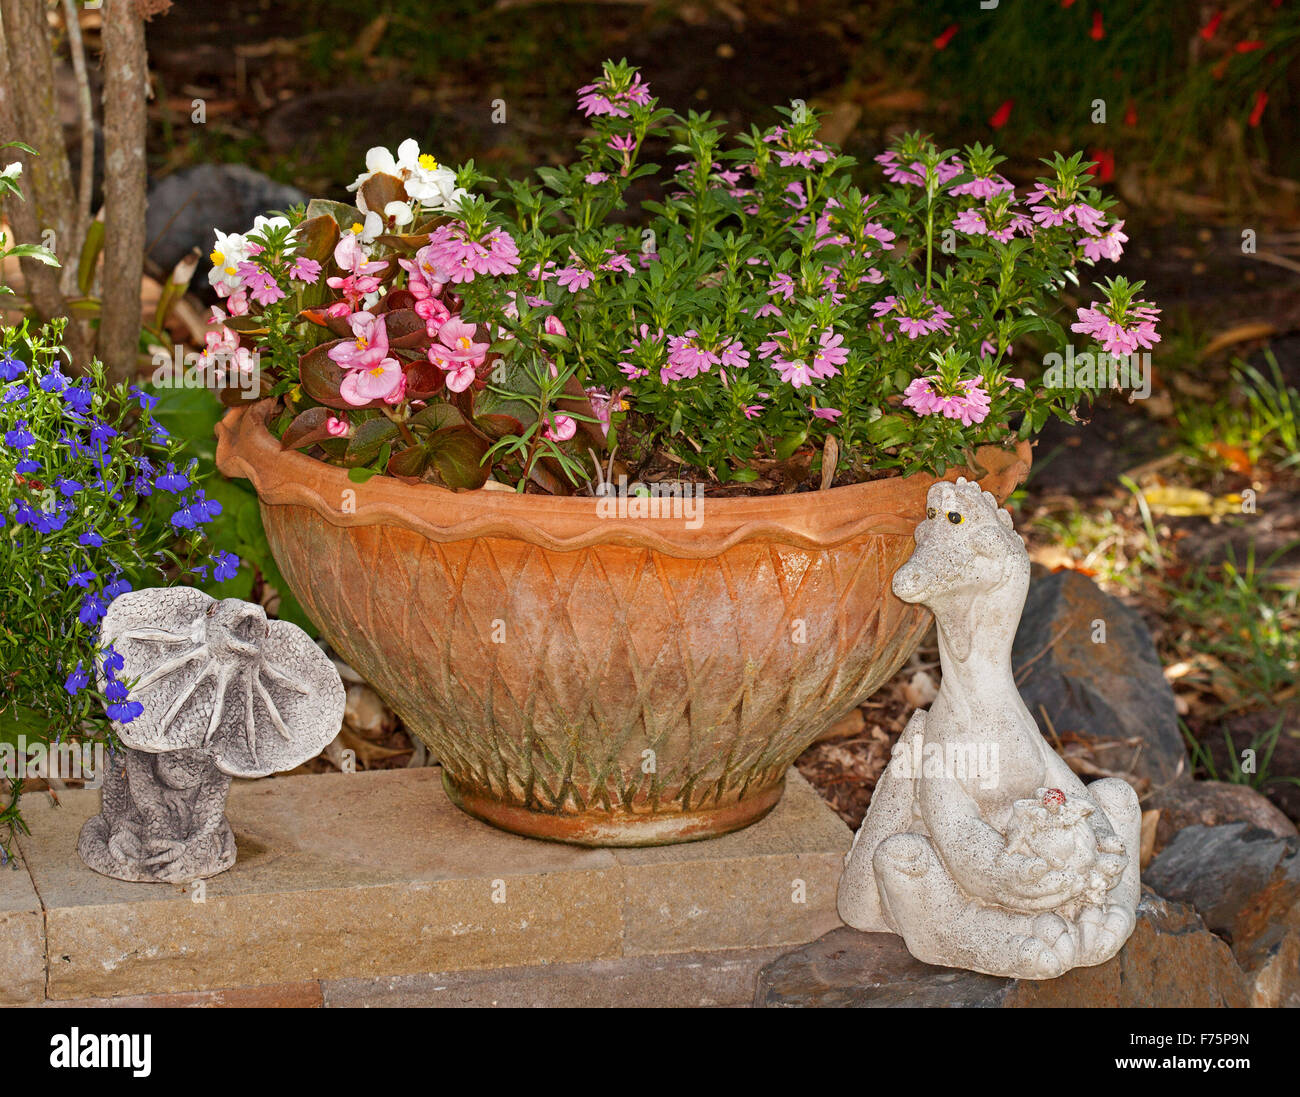 Terracotta container with Scaevola aemula,'Pink Charm' & pink bedding begonias flowering beside two decorative garden ornaments Stock Photo